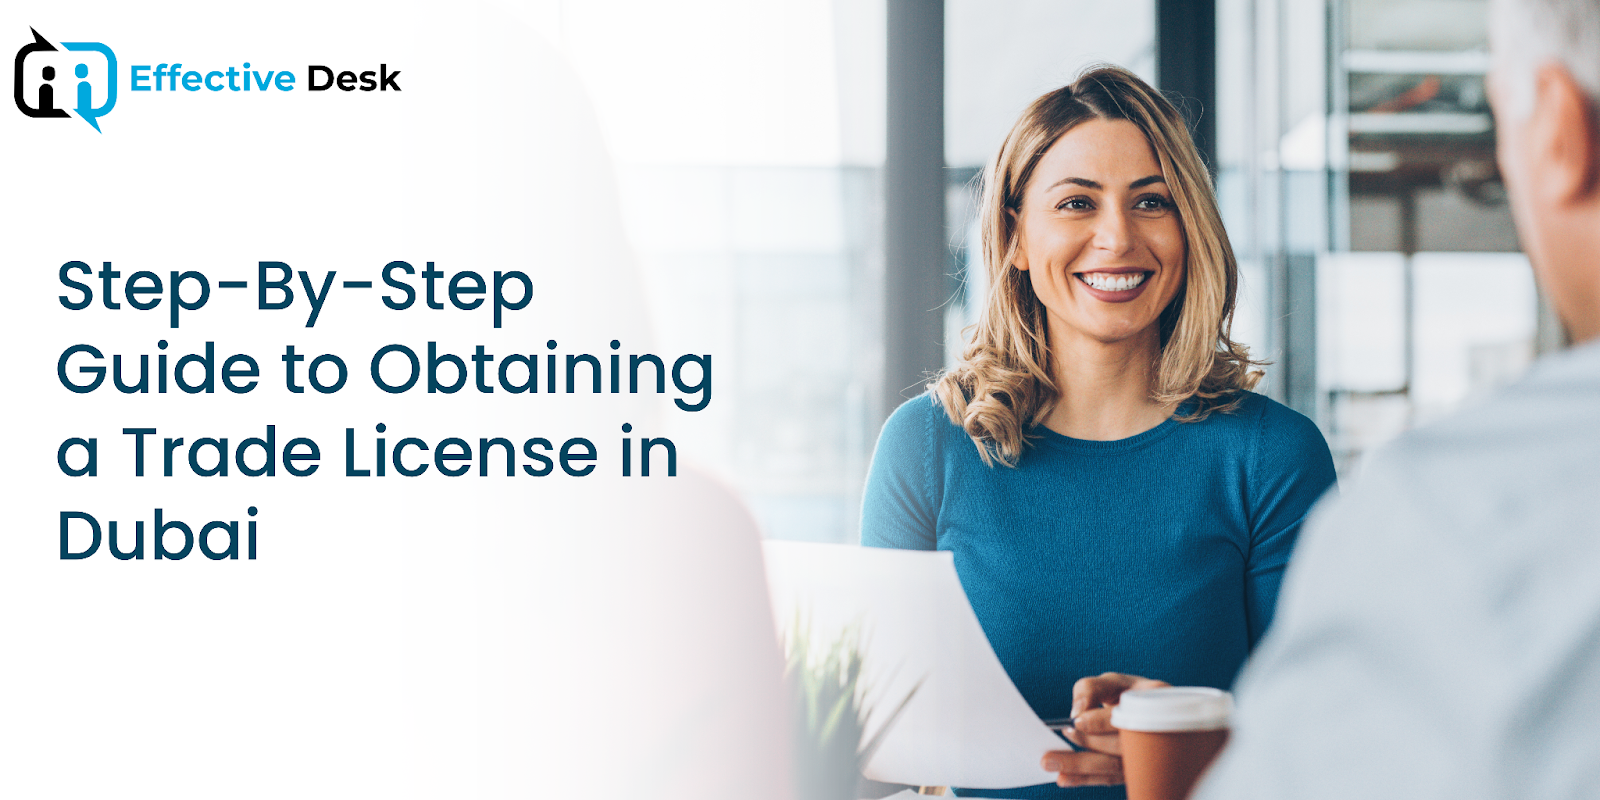 Step-By-Step Guide to Obtaining a Trade License in Dubai